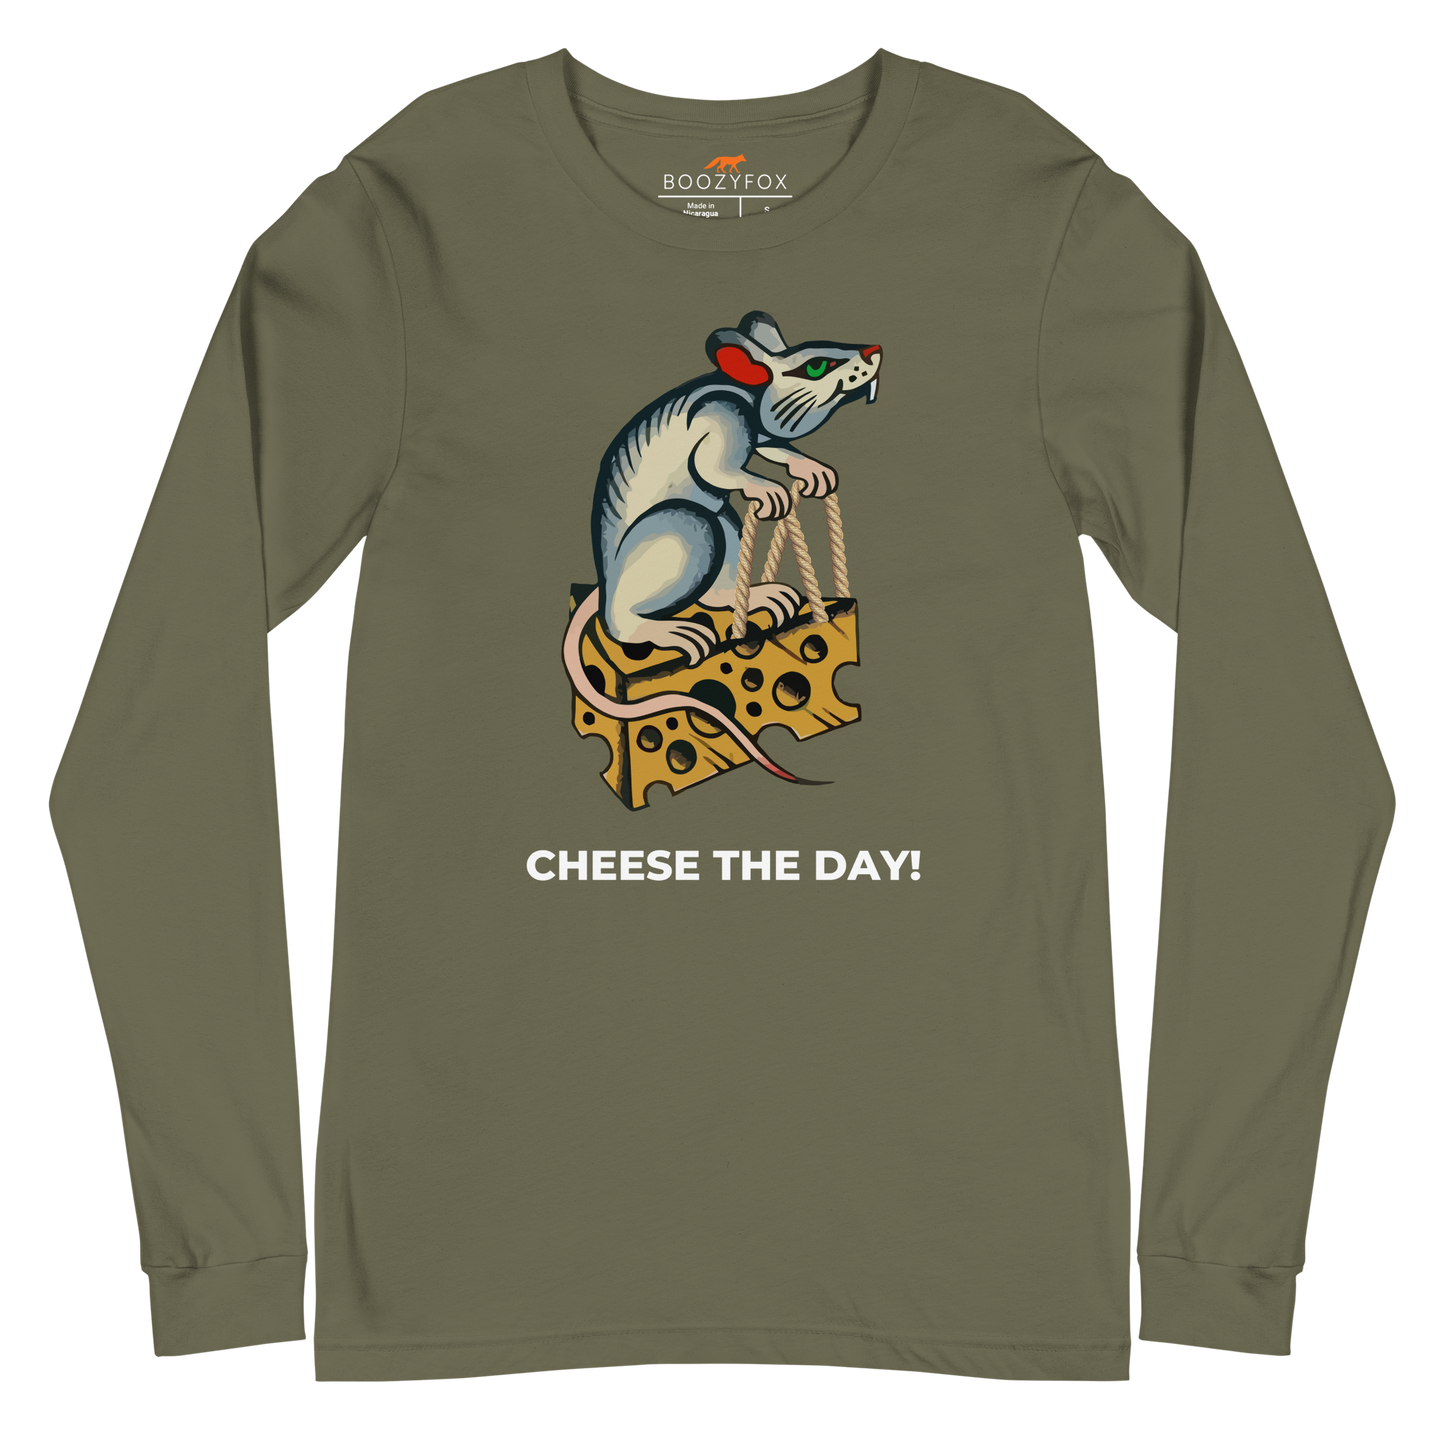 Military Green Rat Long Sleeve Tee featuring a hilarious Cheese The Day graphic on the chest - Funny Rat Long Sleeve Graphic Tees - Boozy Fox